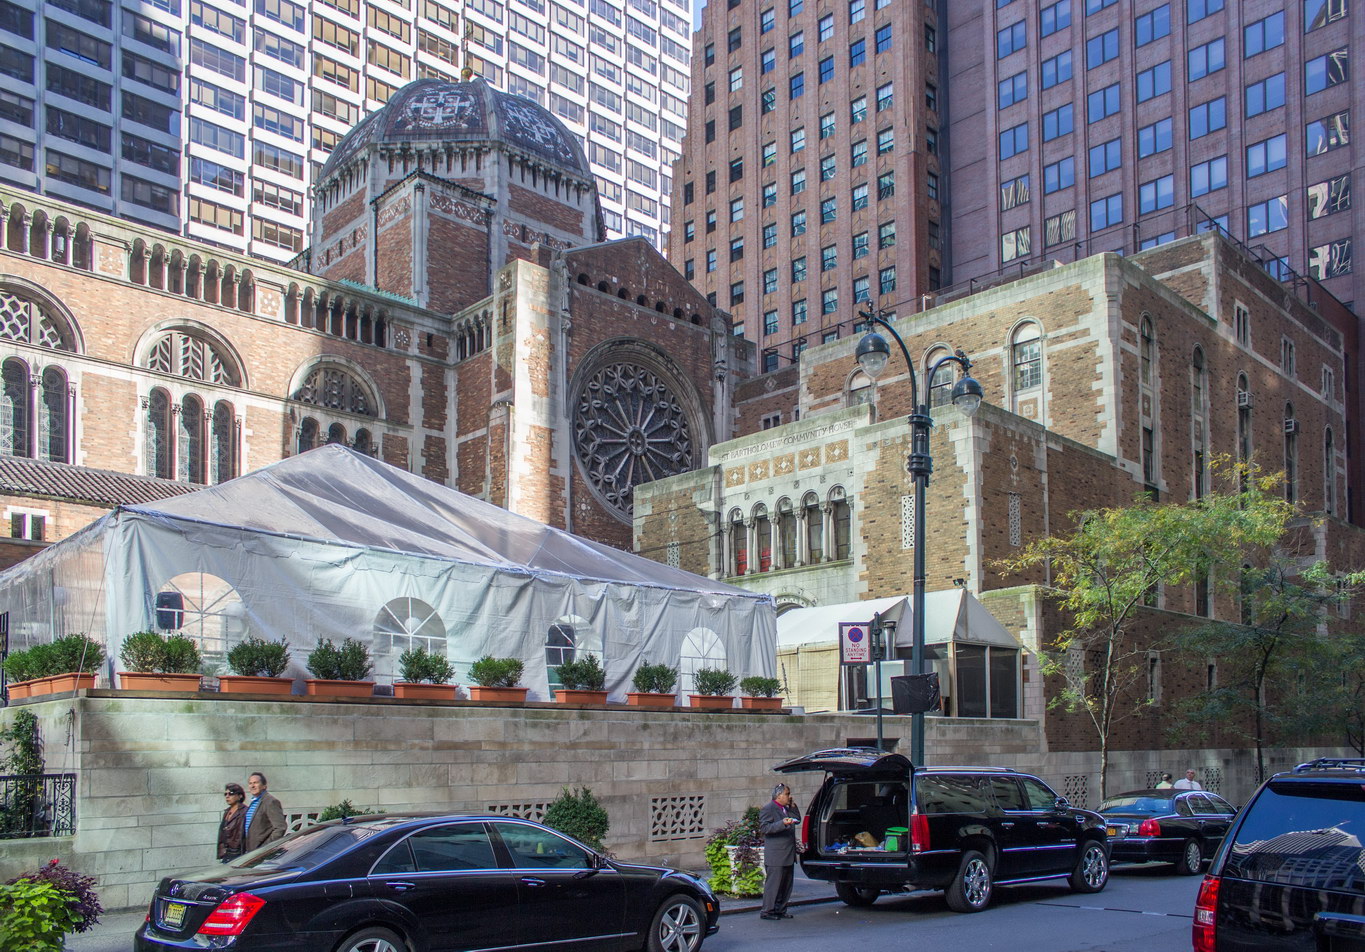 St. Bartholomew's Church - Park Avenue between E50th and E51st Streets. Community House is the building at right.